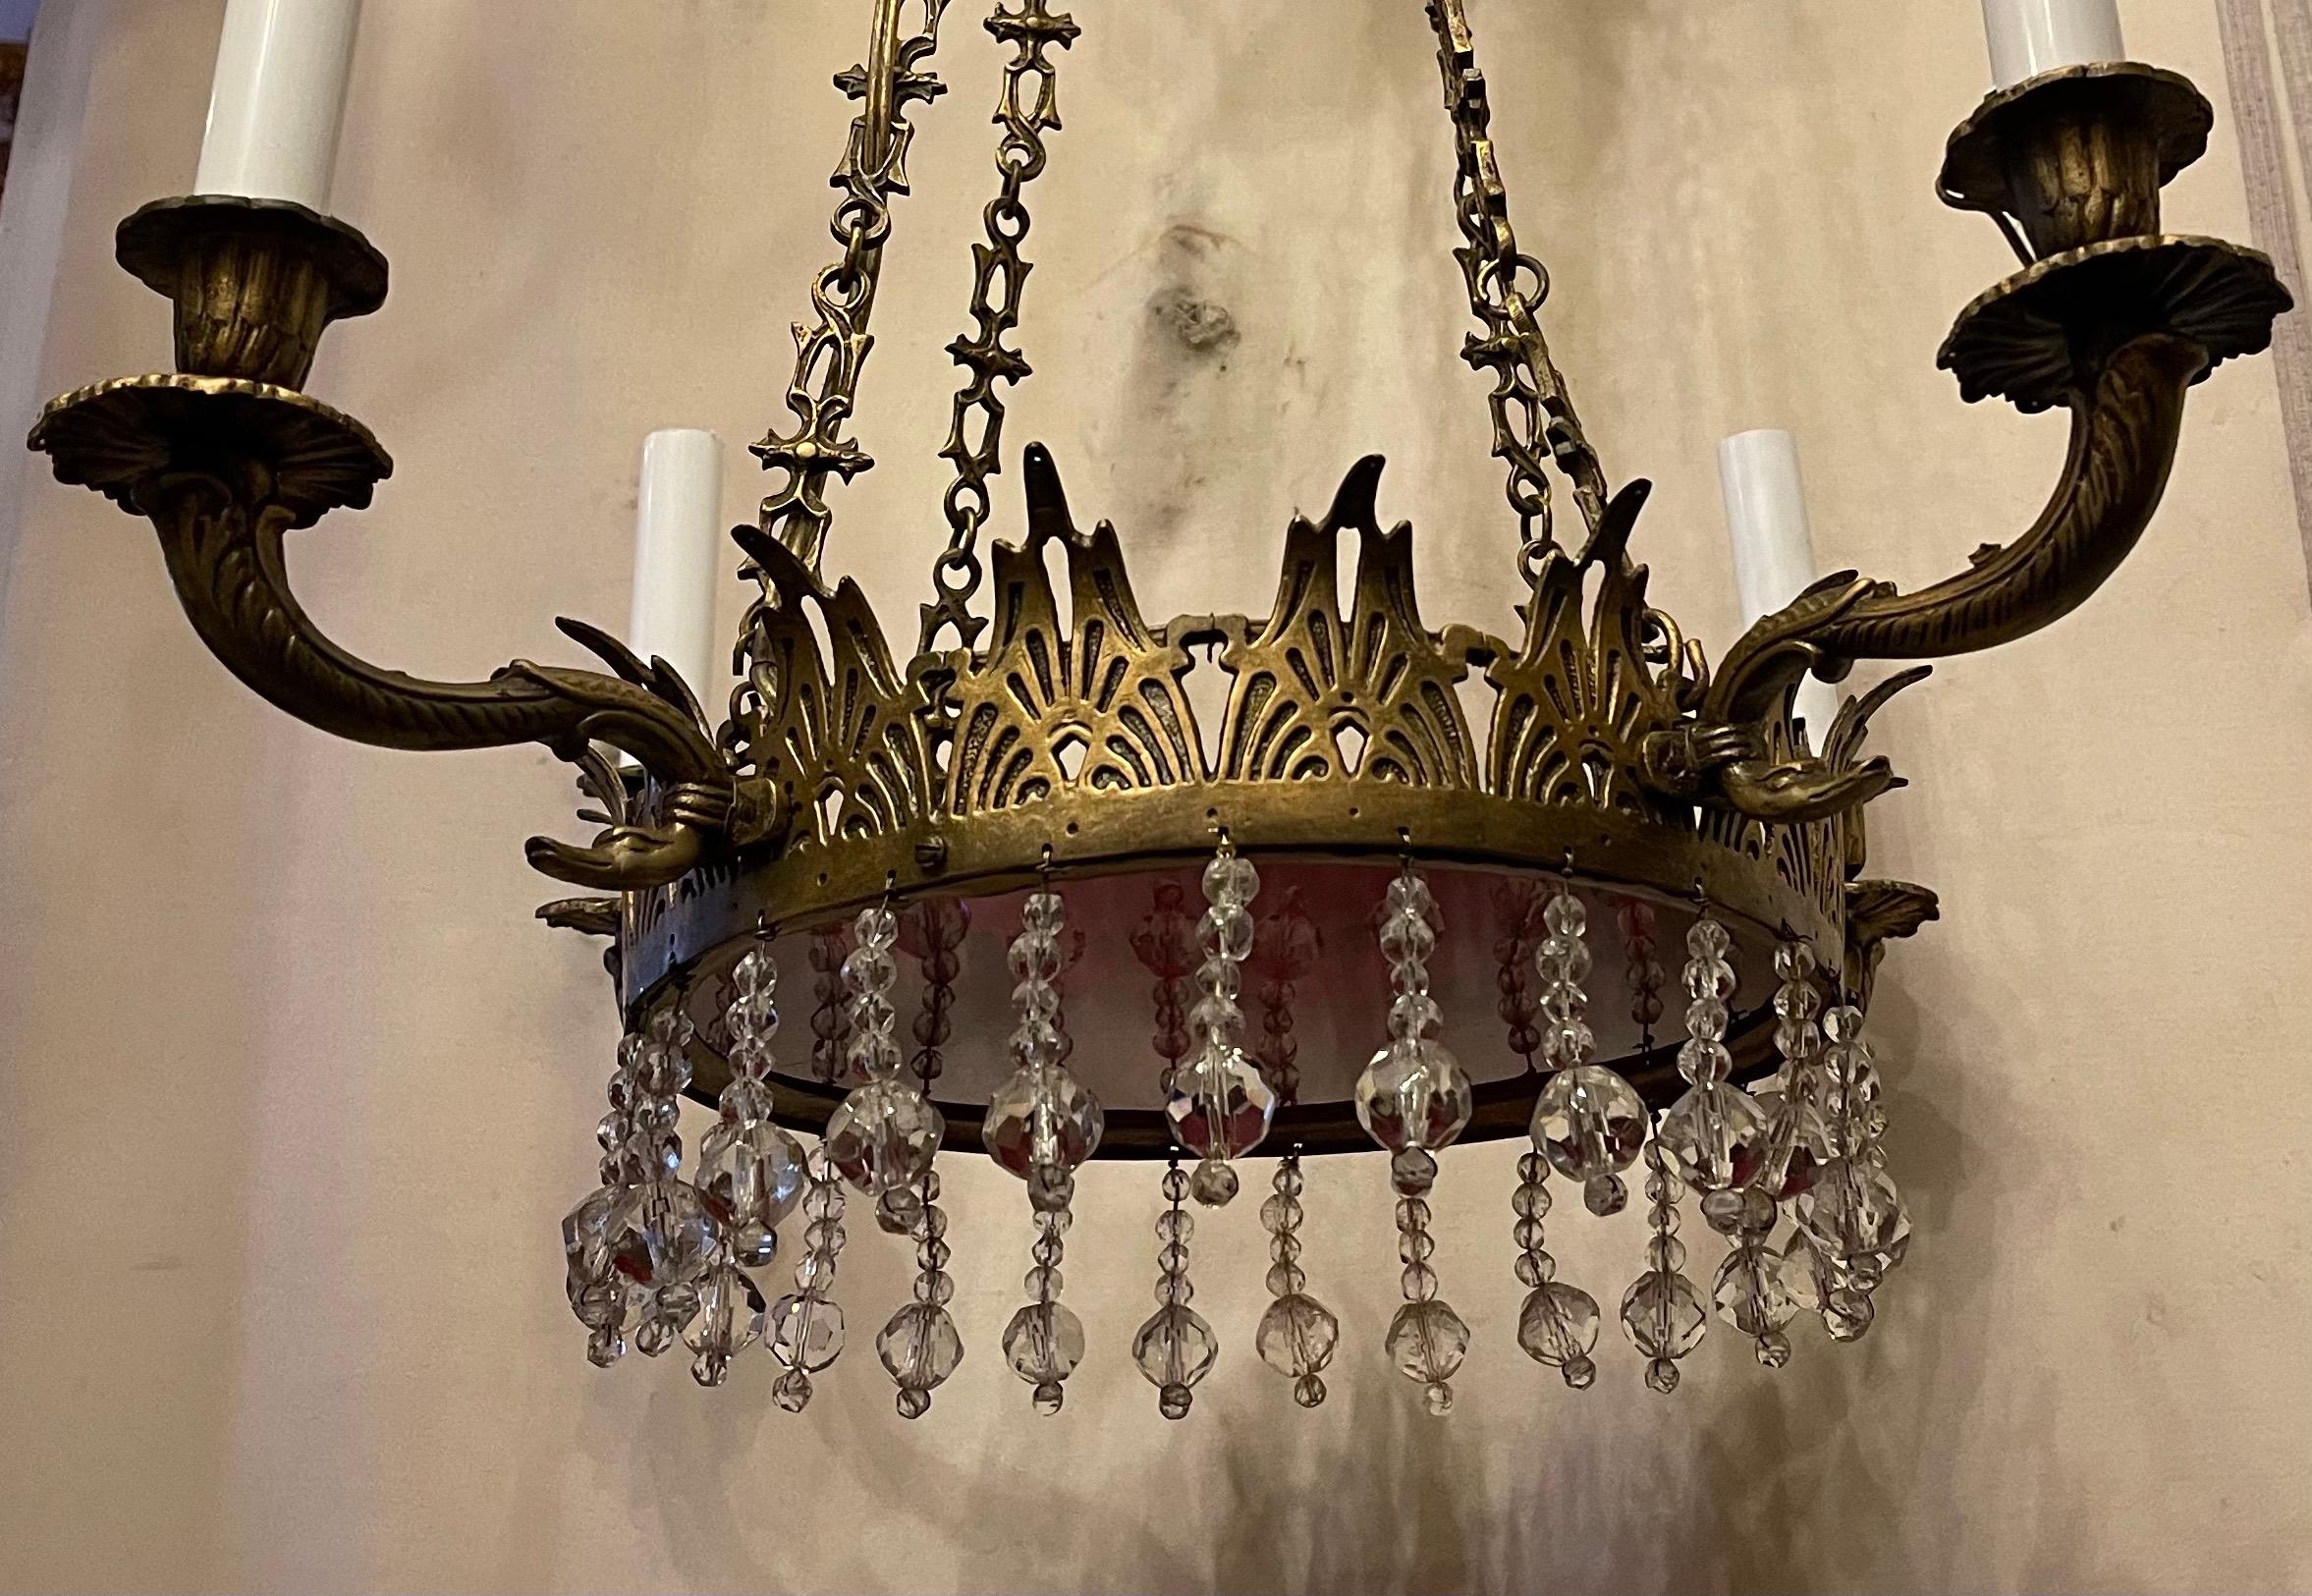 A fine French Empire / neoclassical style gilt bronze and red glass centerpiece with crystal drop Baltic chandelier having four swan arms rewired and accompanied by Cain canopy and mounting hardware.

This chandeliers height may be adjusted by